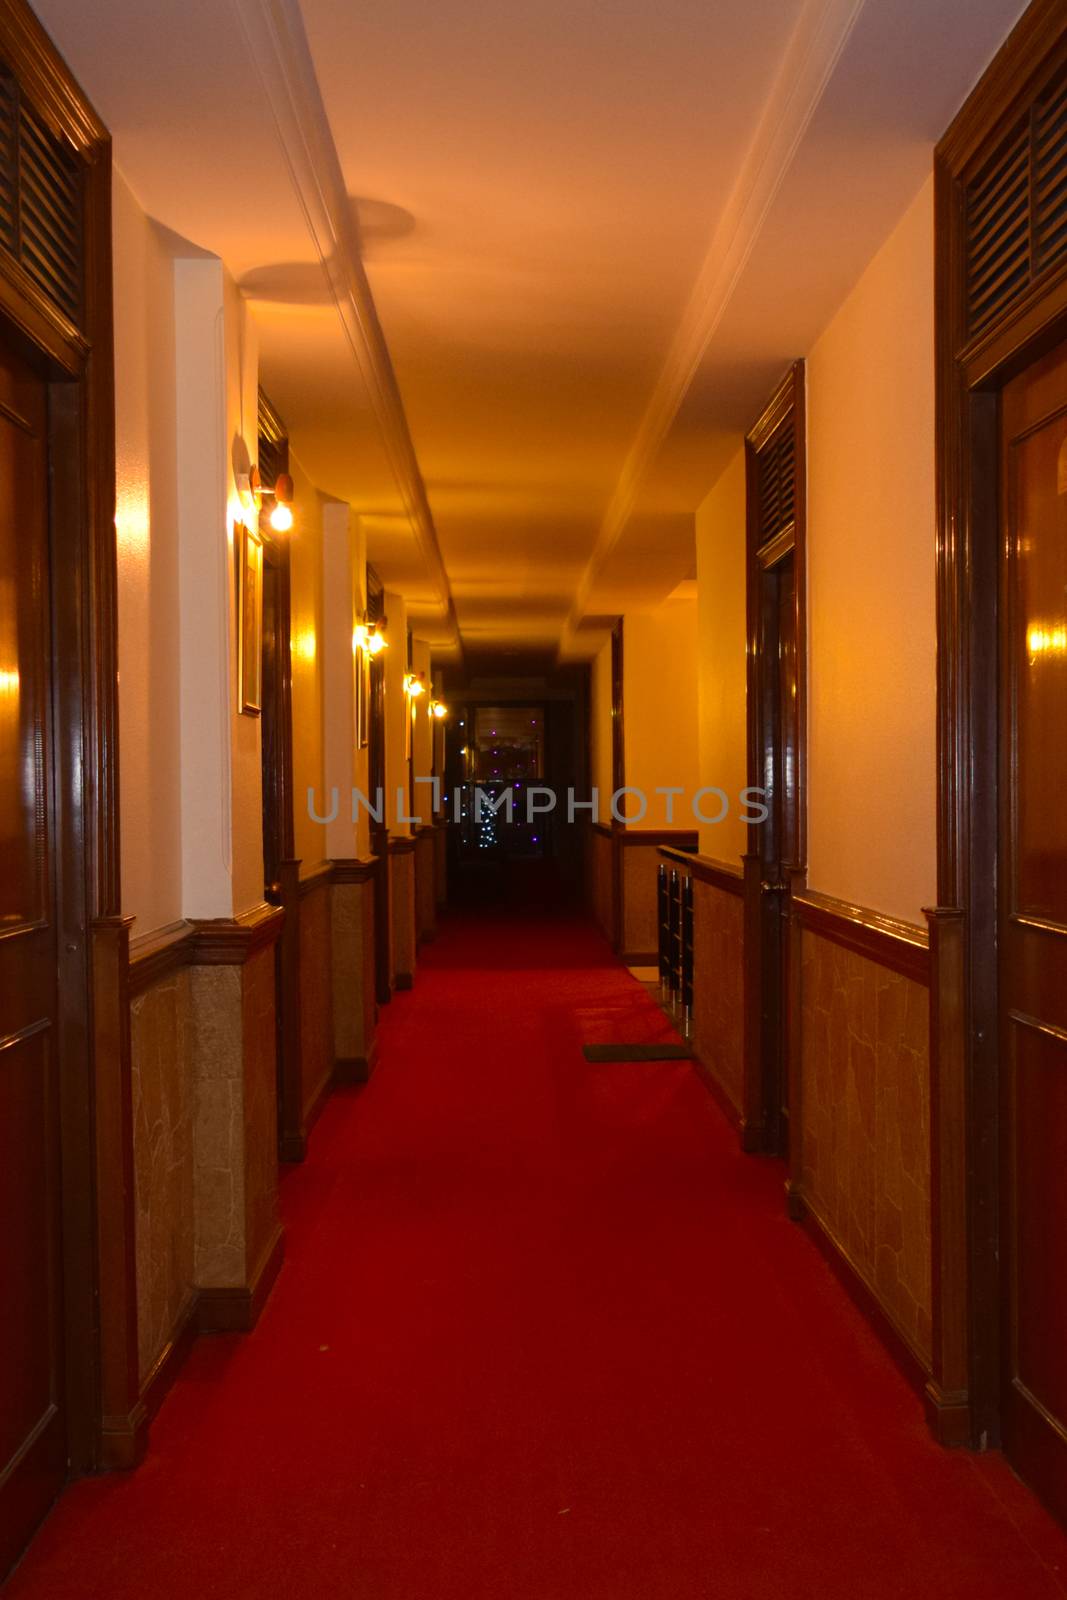 Center passageway of a luxury hotel with bright walls and illuminated lights. by sudiptabhowmick